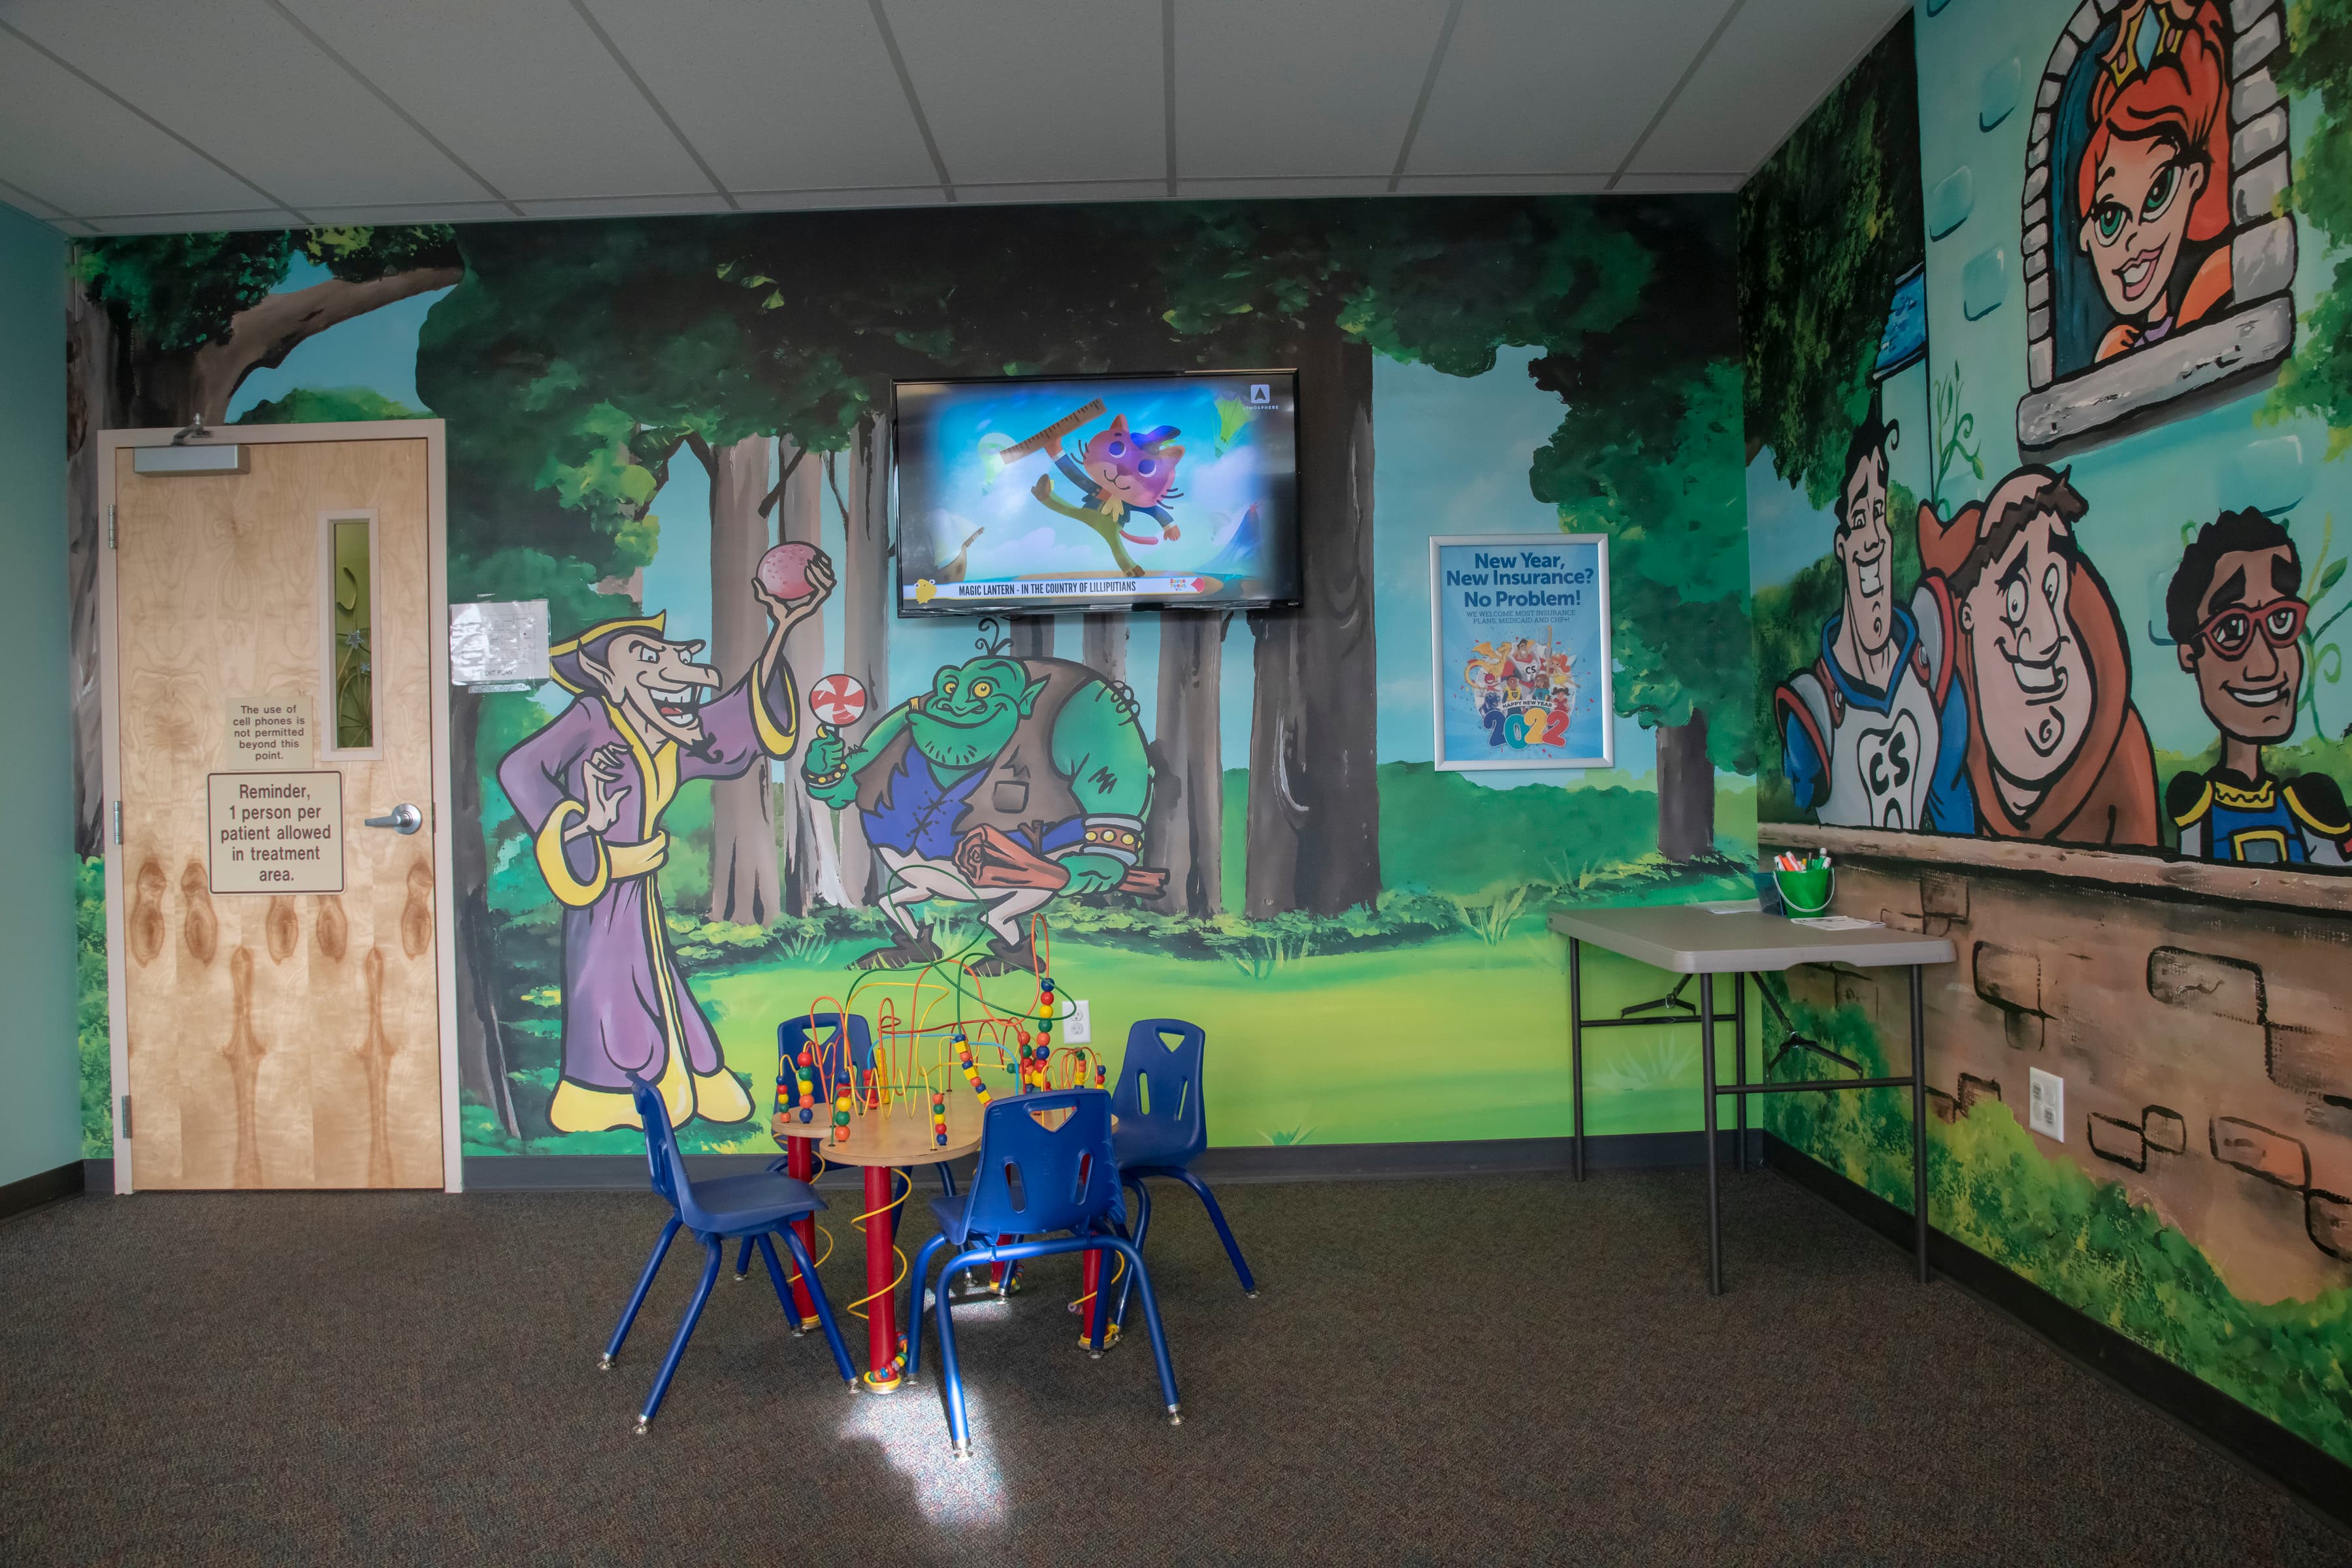 play area for children with colorful murals on the wall